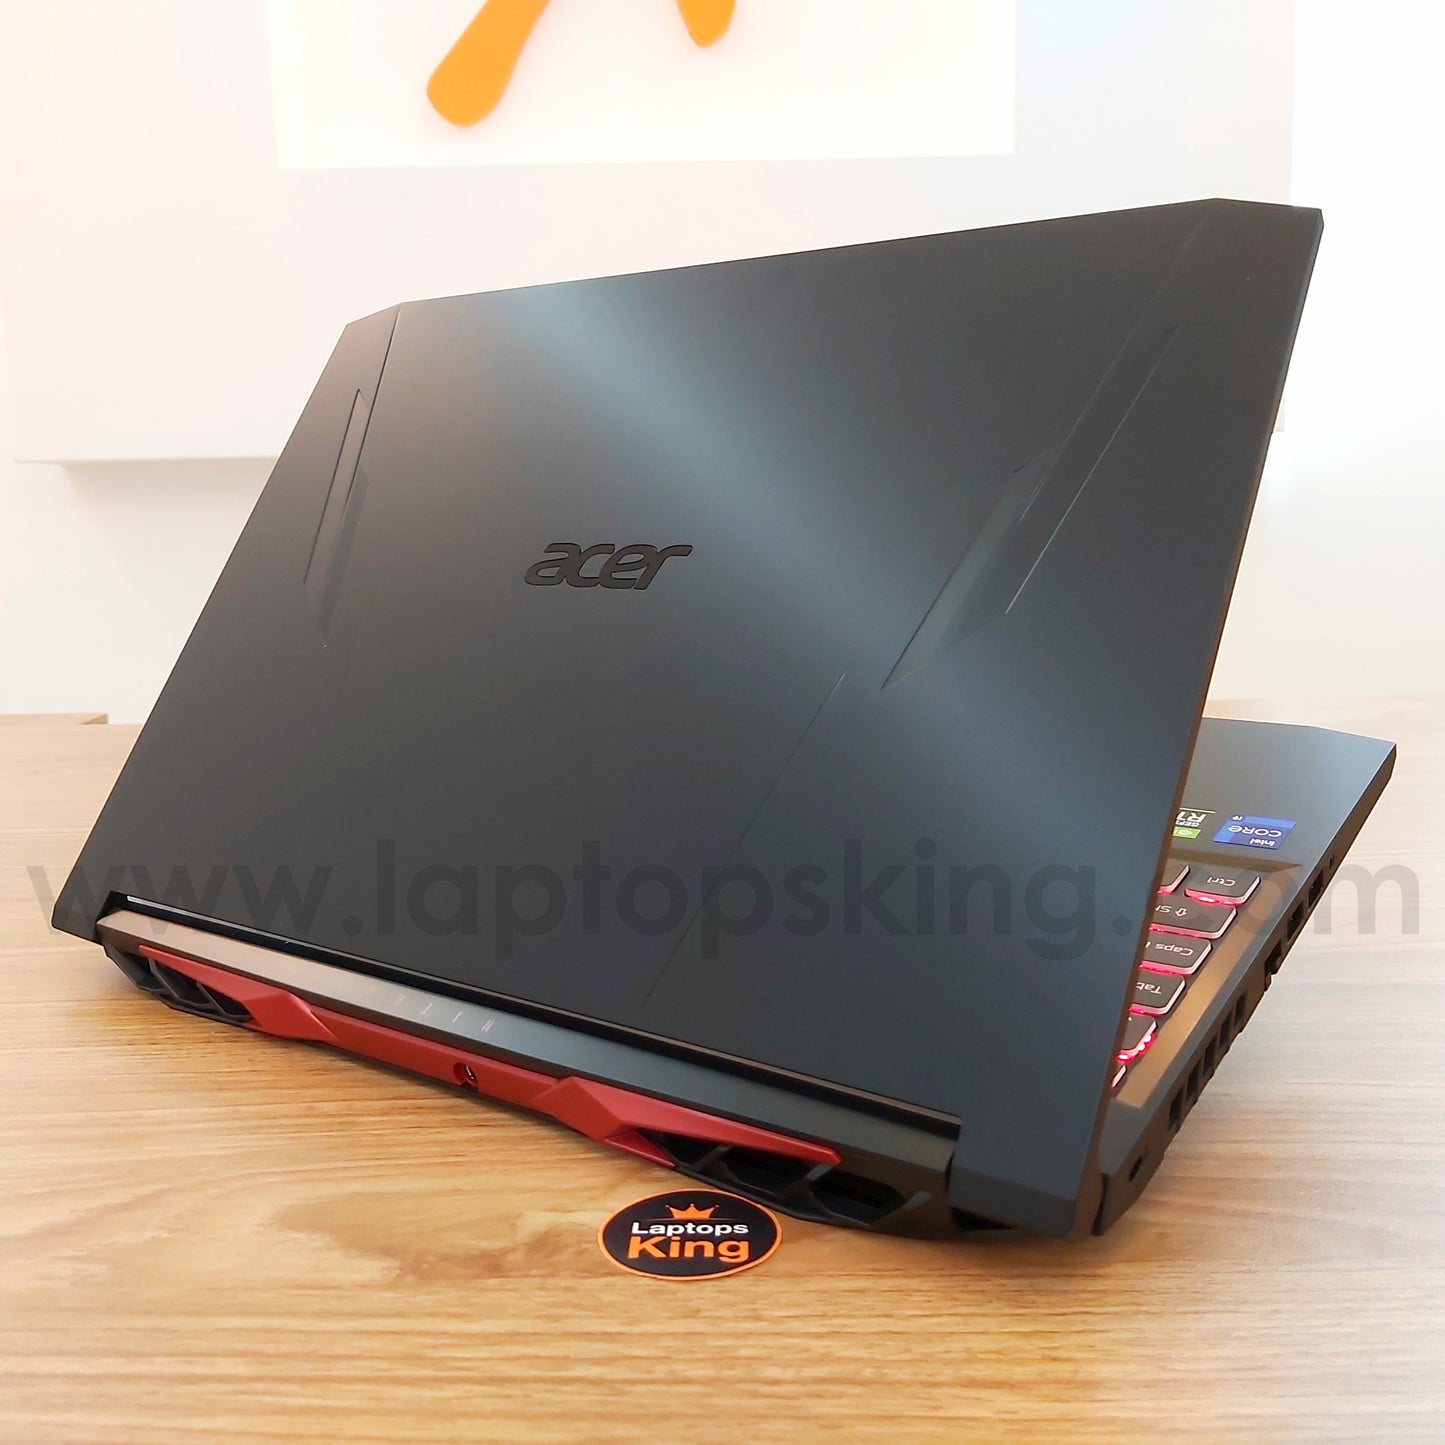 Acer Nitro 5 AN515-57-919C i9-11900H RTX 3060 144HZ Gaming Laptop Offers (Brand New)